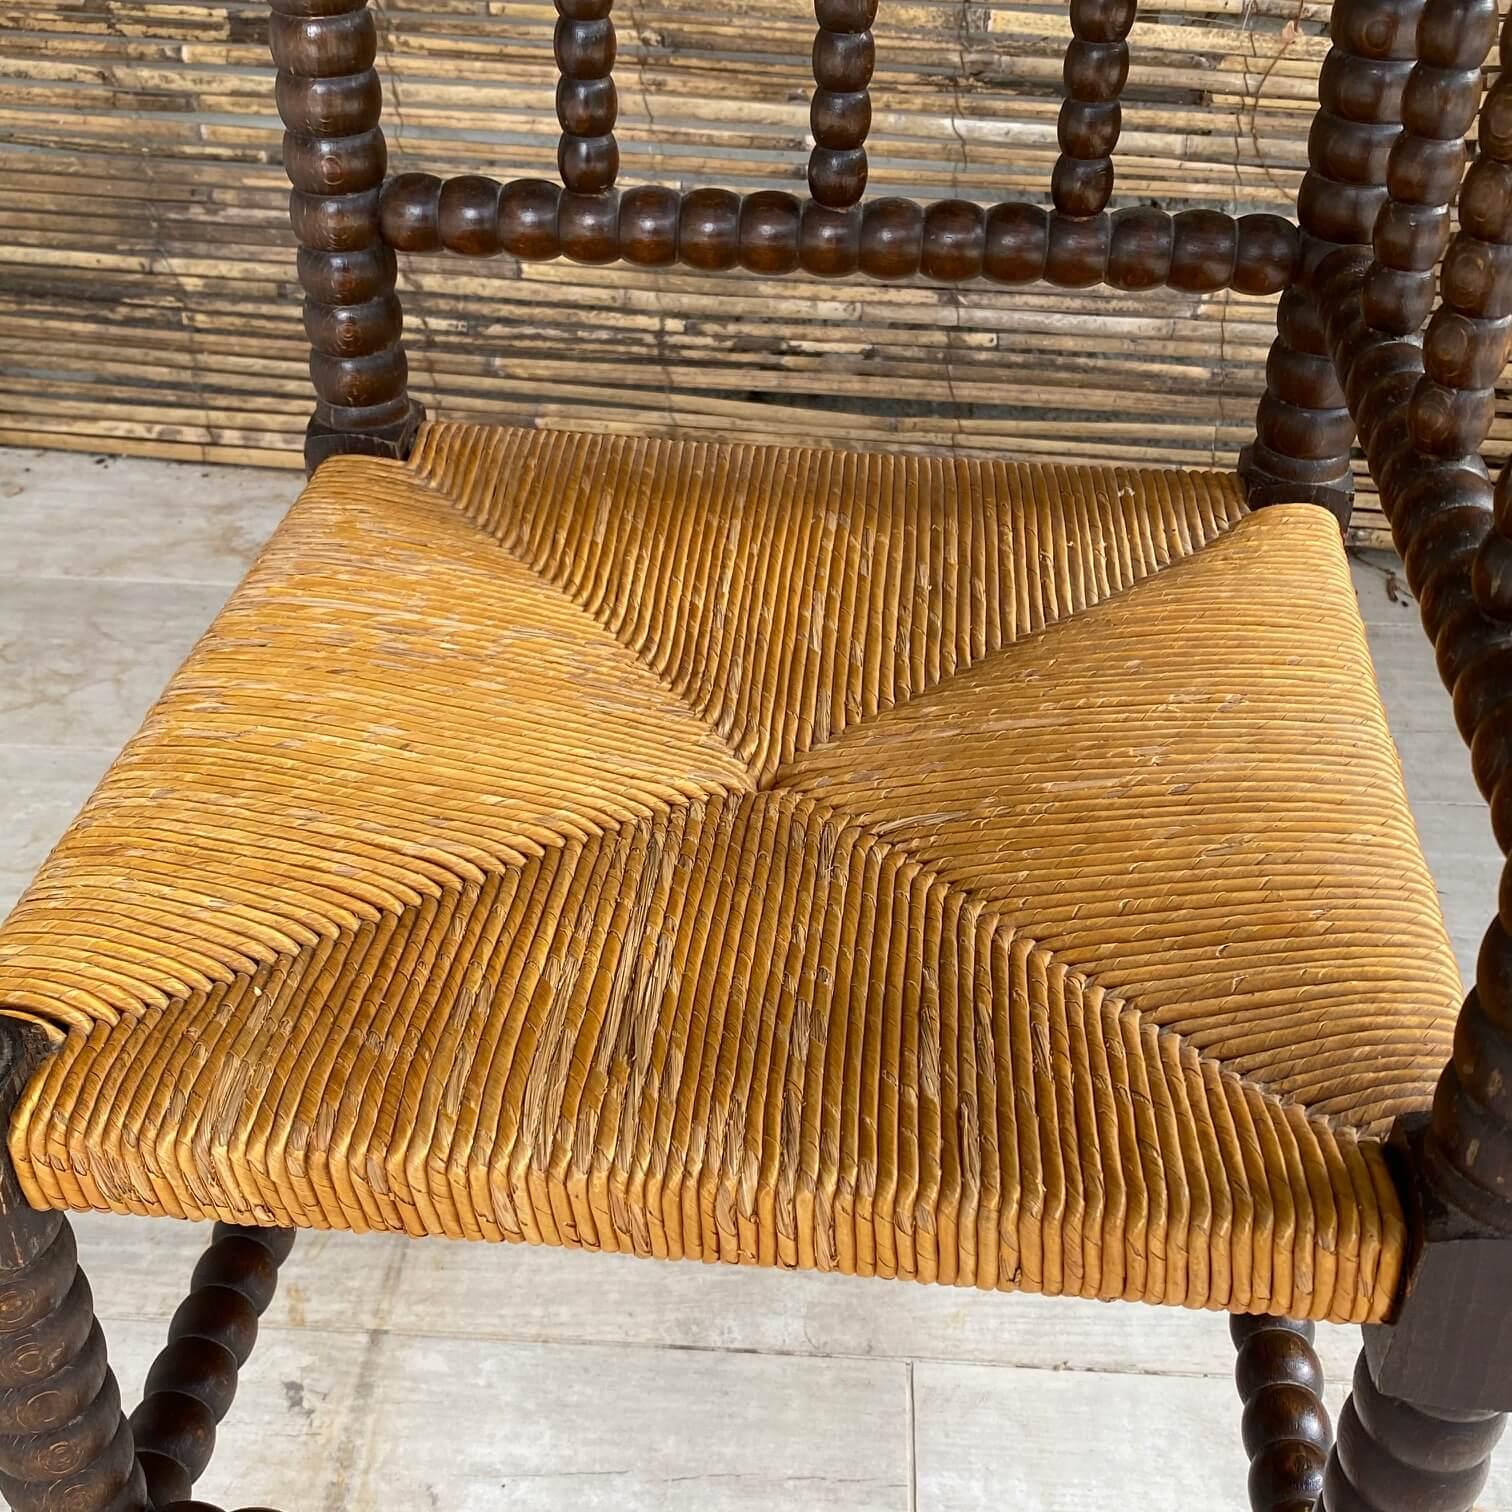 Mid-20th Century Stool in Wood and Straw, Brown and Yellow, France 1970, French Riviera